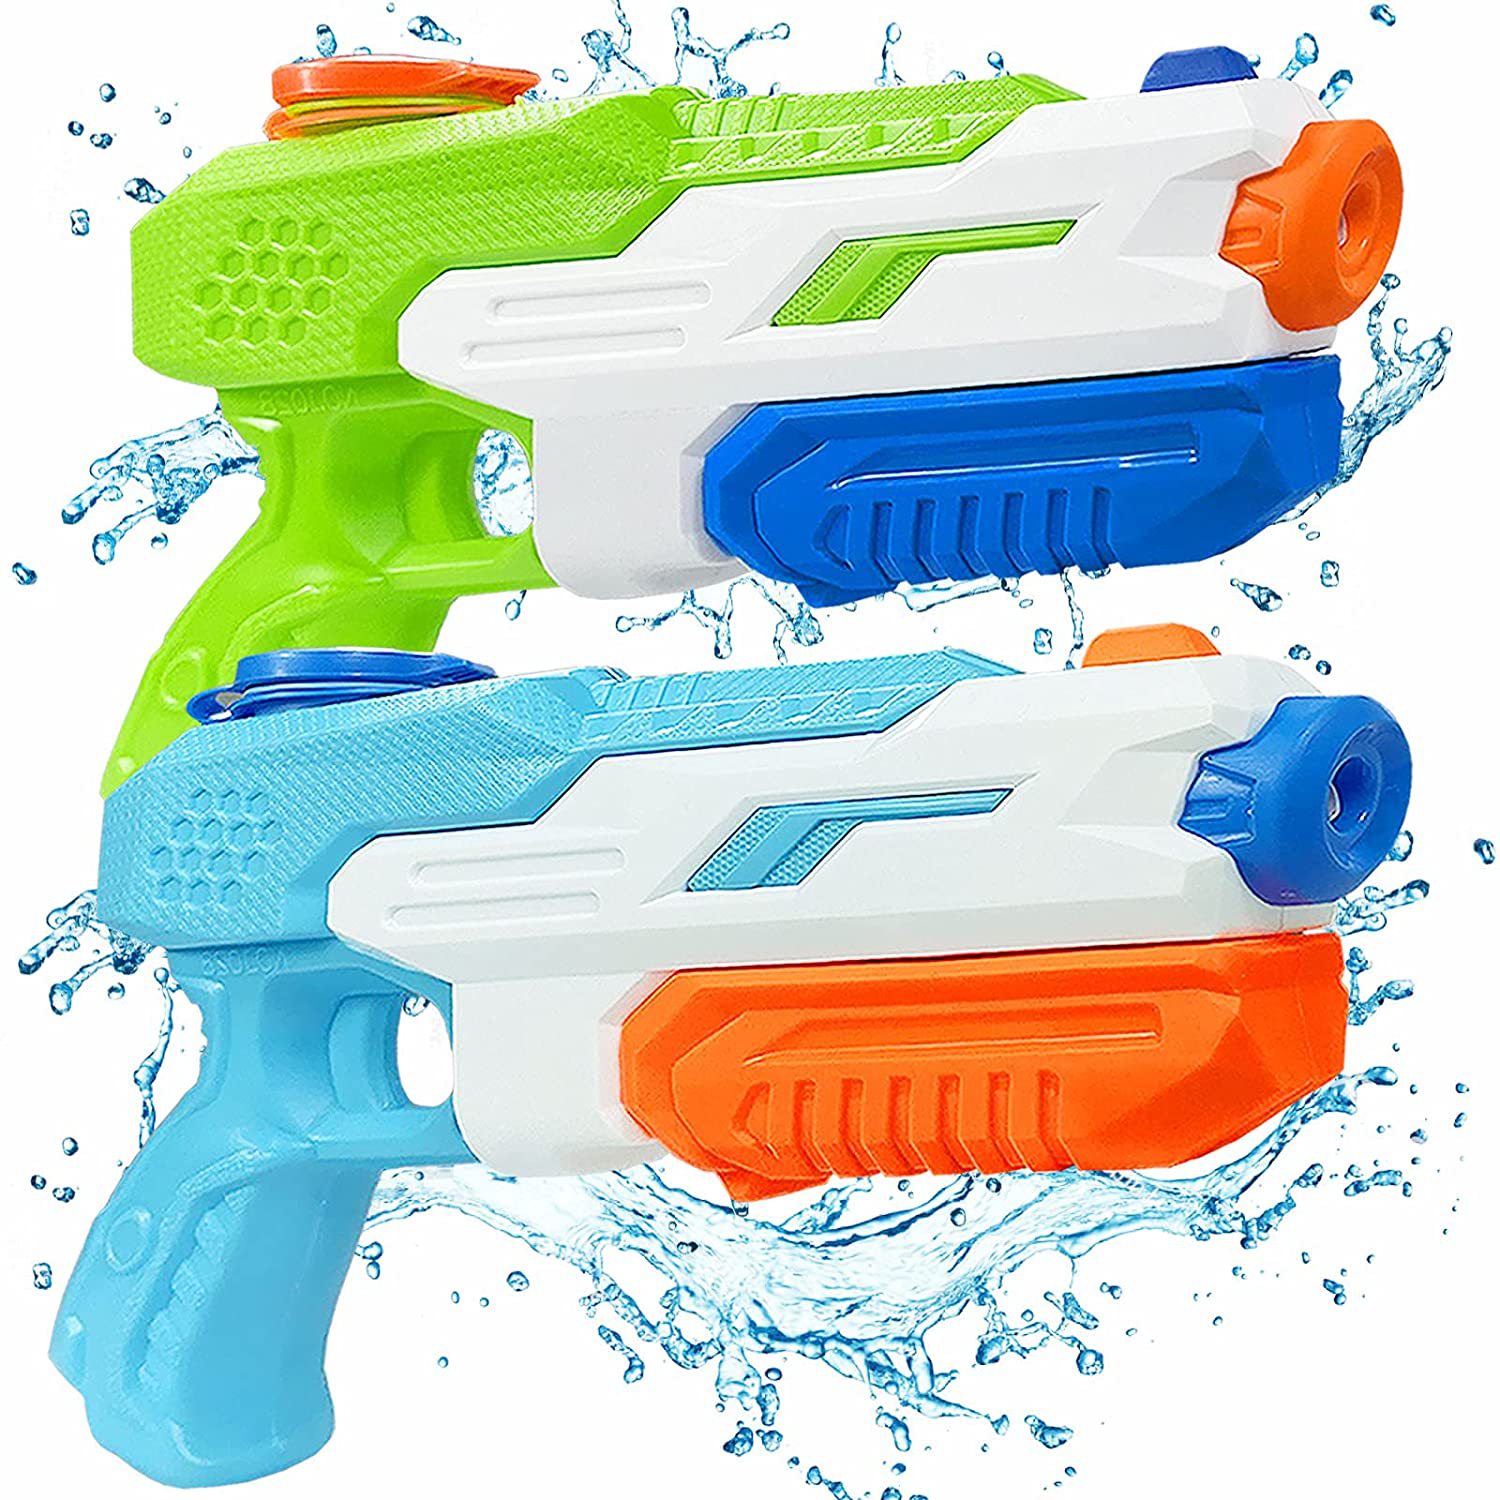 Large Water Gun High Capacity 30 Feet Shooting Range Water Shooter for Kid Adult Toy for Swimming Pool Party Beach Fight Activity